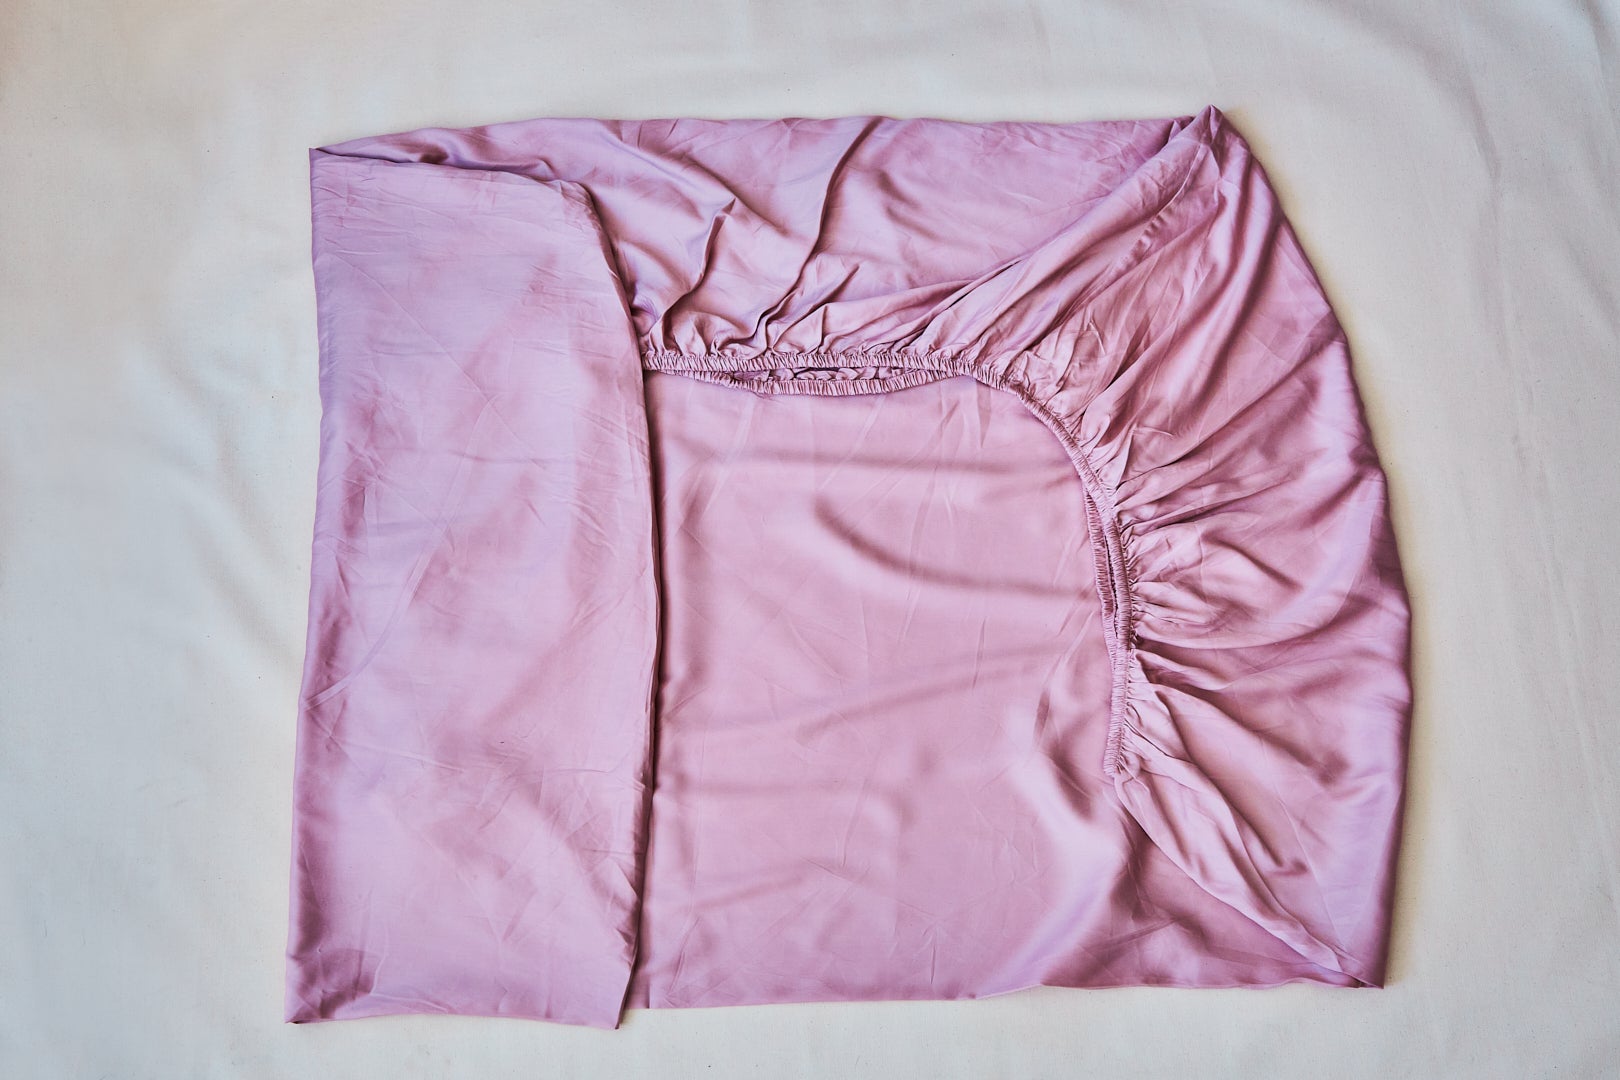 pink fitted folded sheet in a rectangle shape